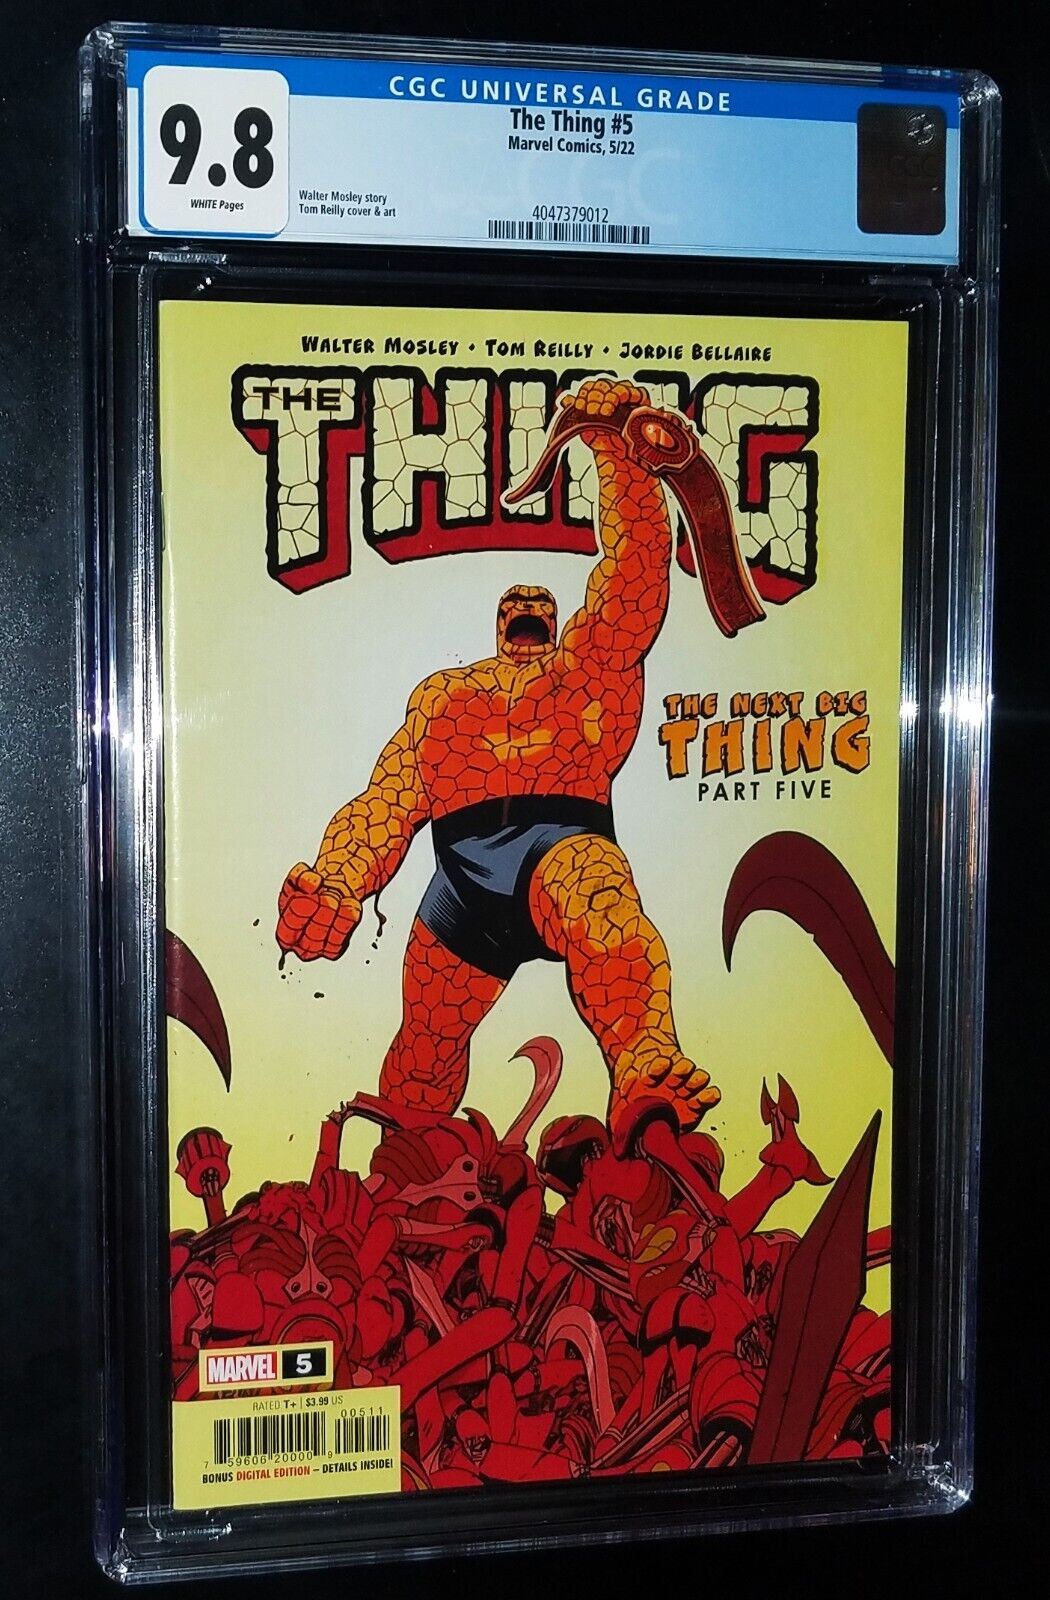 CGC THE THING #5 2022 Marvel Comics CGC 9.8 NM/MT White Pages